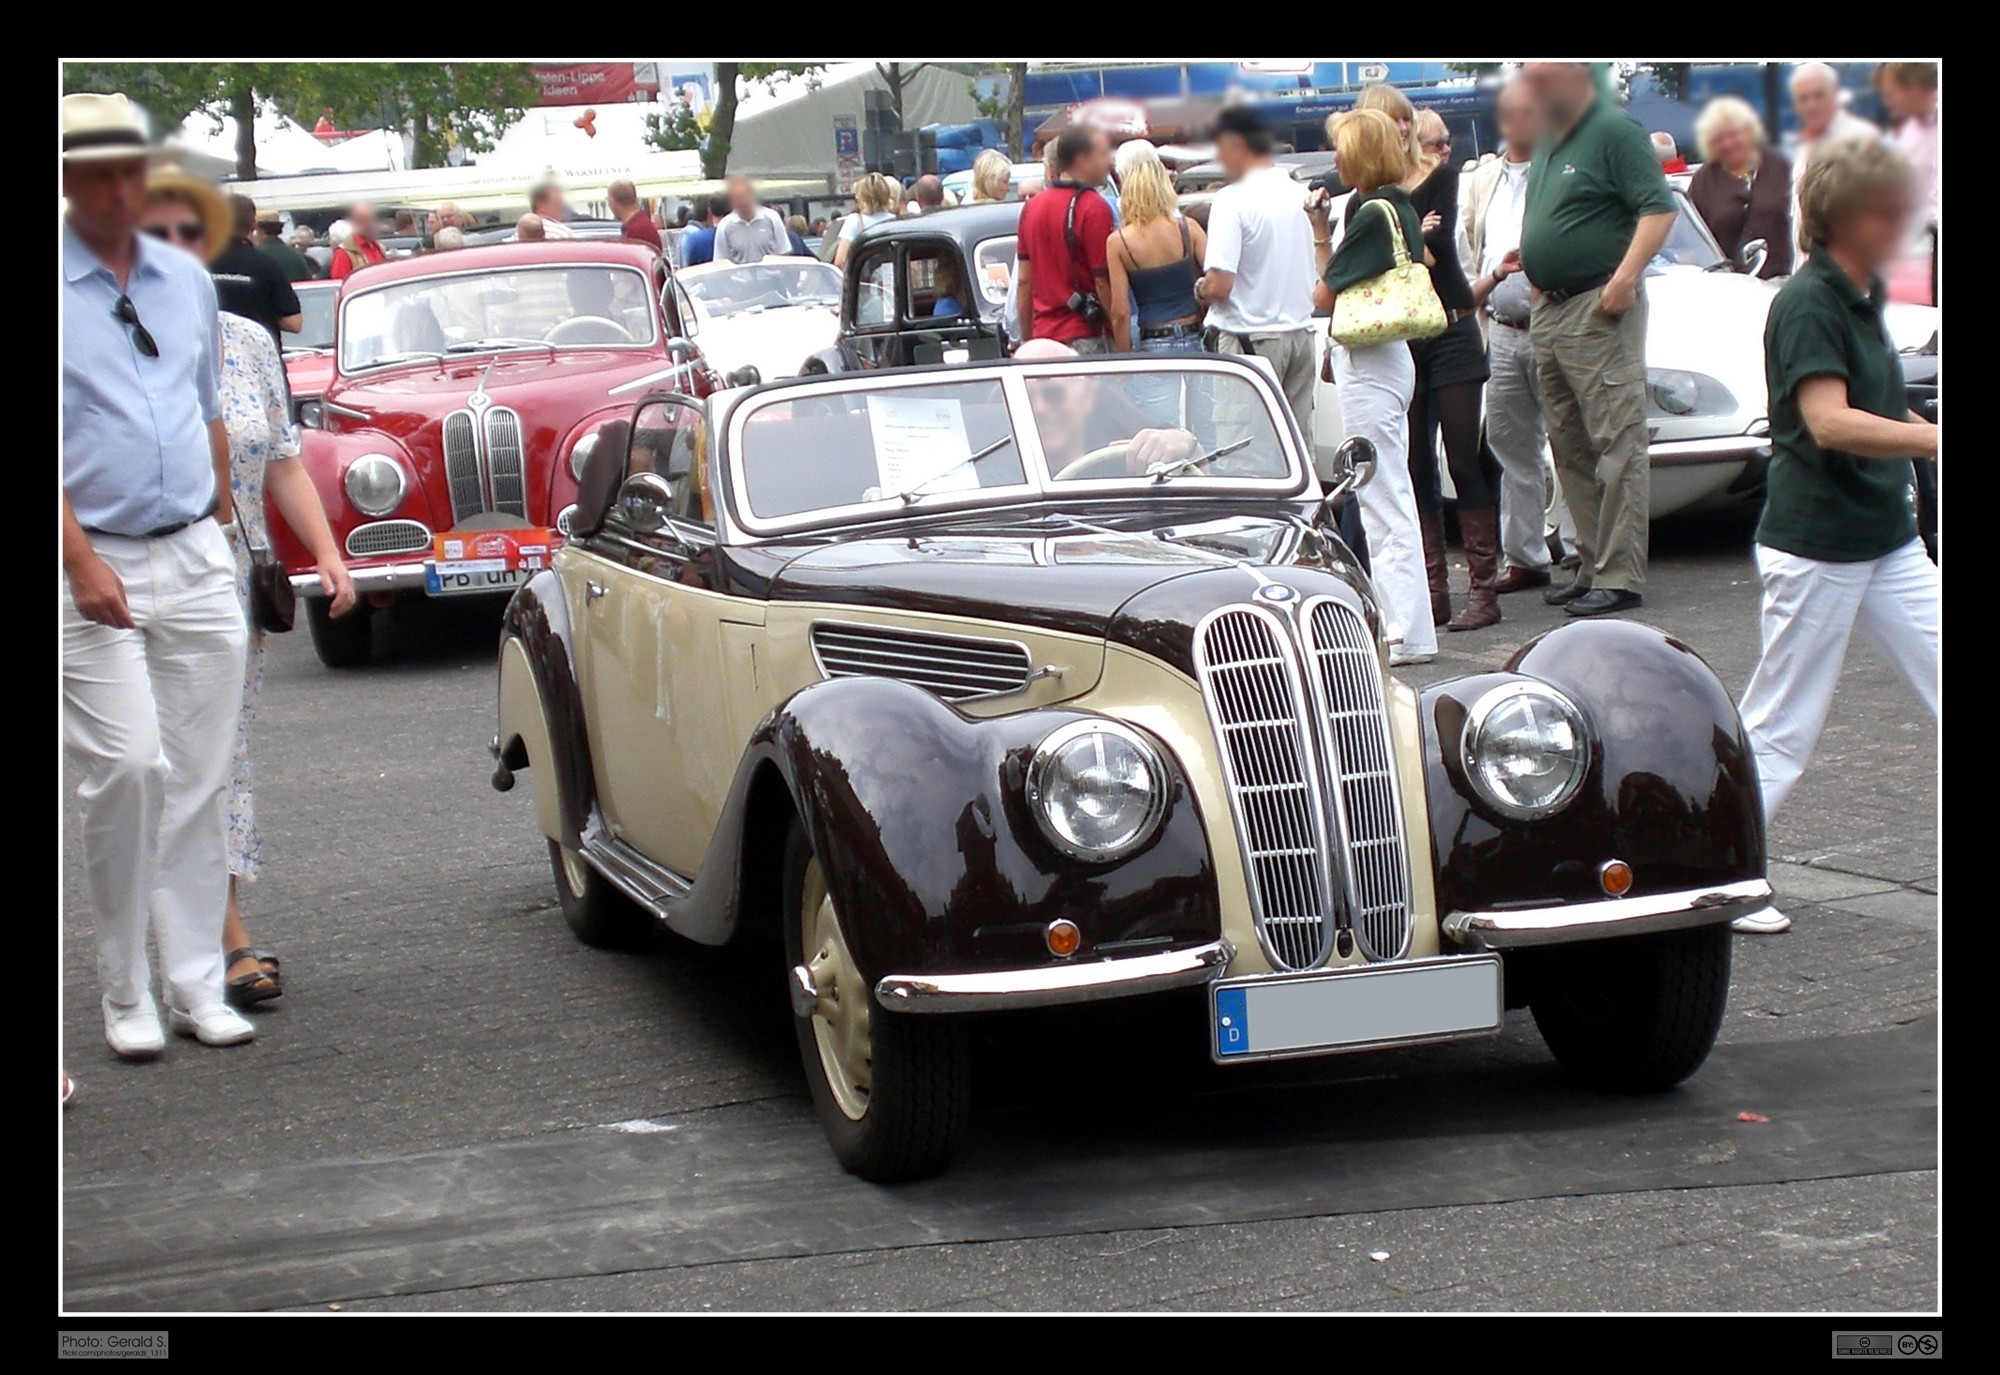 1937 BMW 327 and 1952 BMW 502 | Flickr - Photo Sharing!